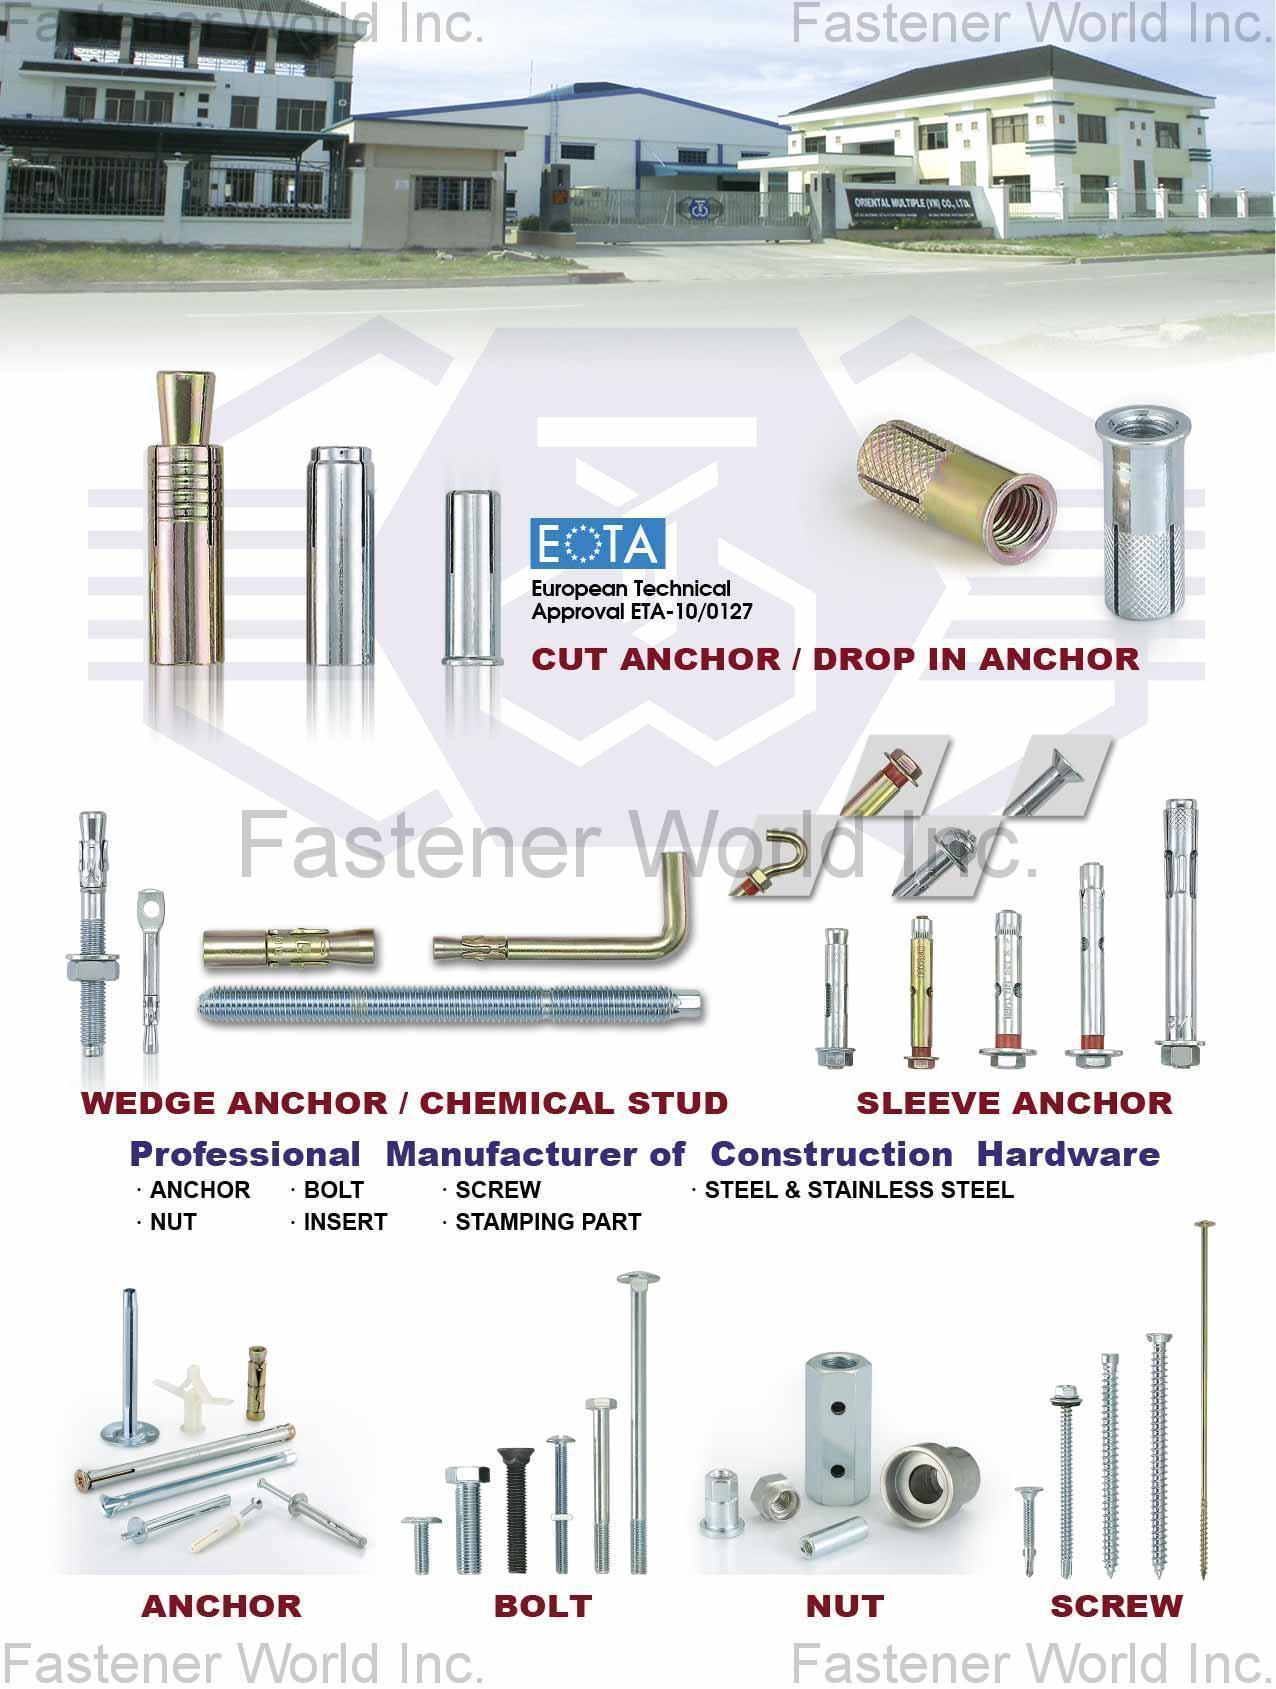 TSENG WIN / ORIENTAL MULTIPLE ENTERPRISE LTD. , CUT ANCHOR, DROP IN ANCHOR, WEDGE ANCHOR, CHEMICAL STUD, SLEEVE ANCHOR, ANCHOR, BOLT, NUT, SCREW, INSERT, STAMPING PART, STEEL & STAINLESS STEEL , Wedge Anchors